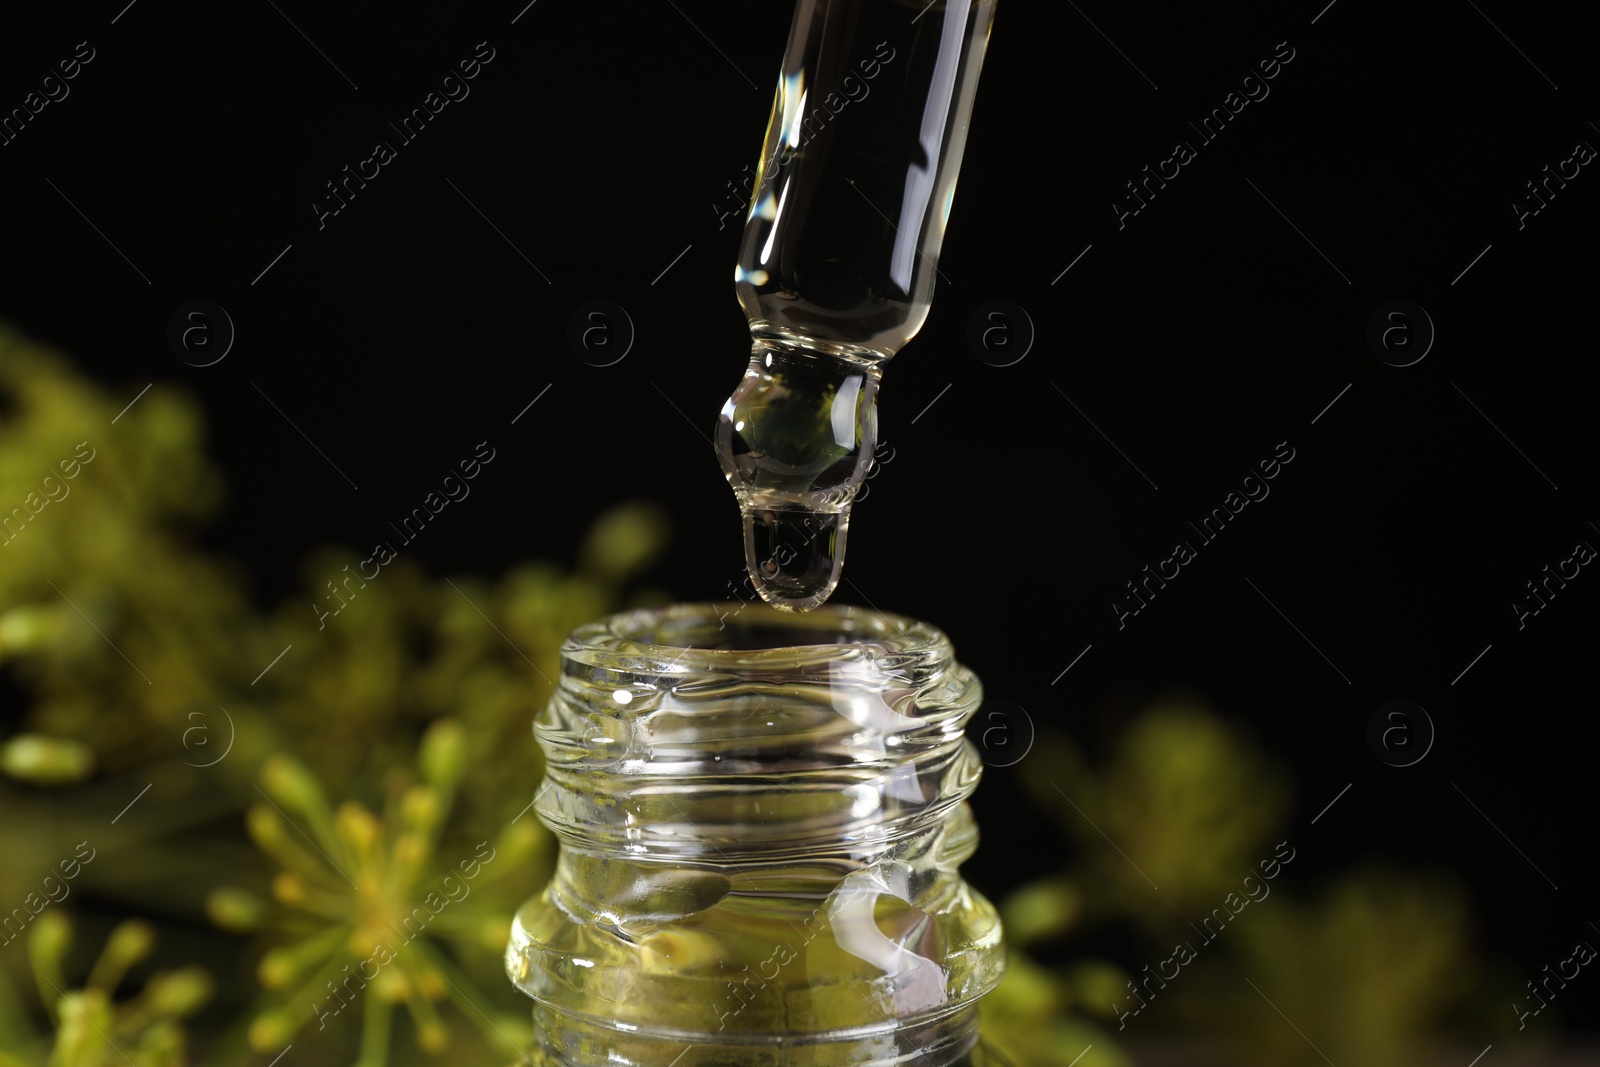 Photo of Dripping dill essential oil from pipette into bottle on black background, closeup